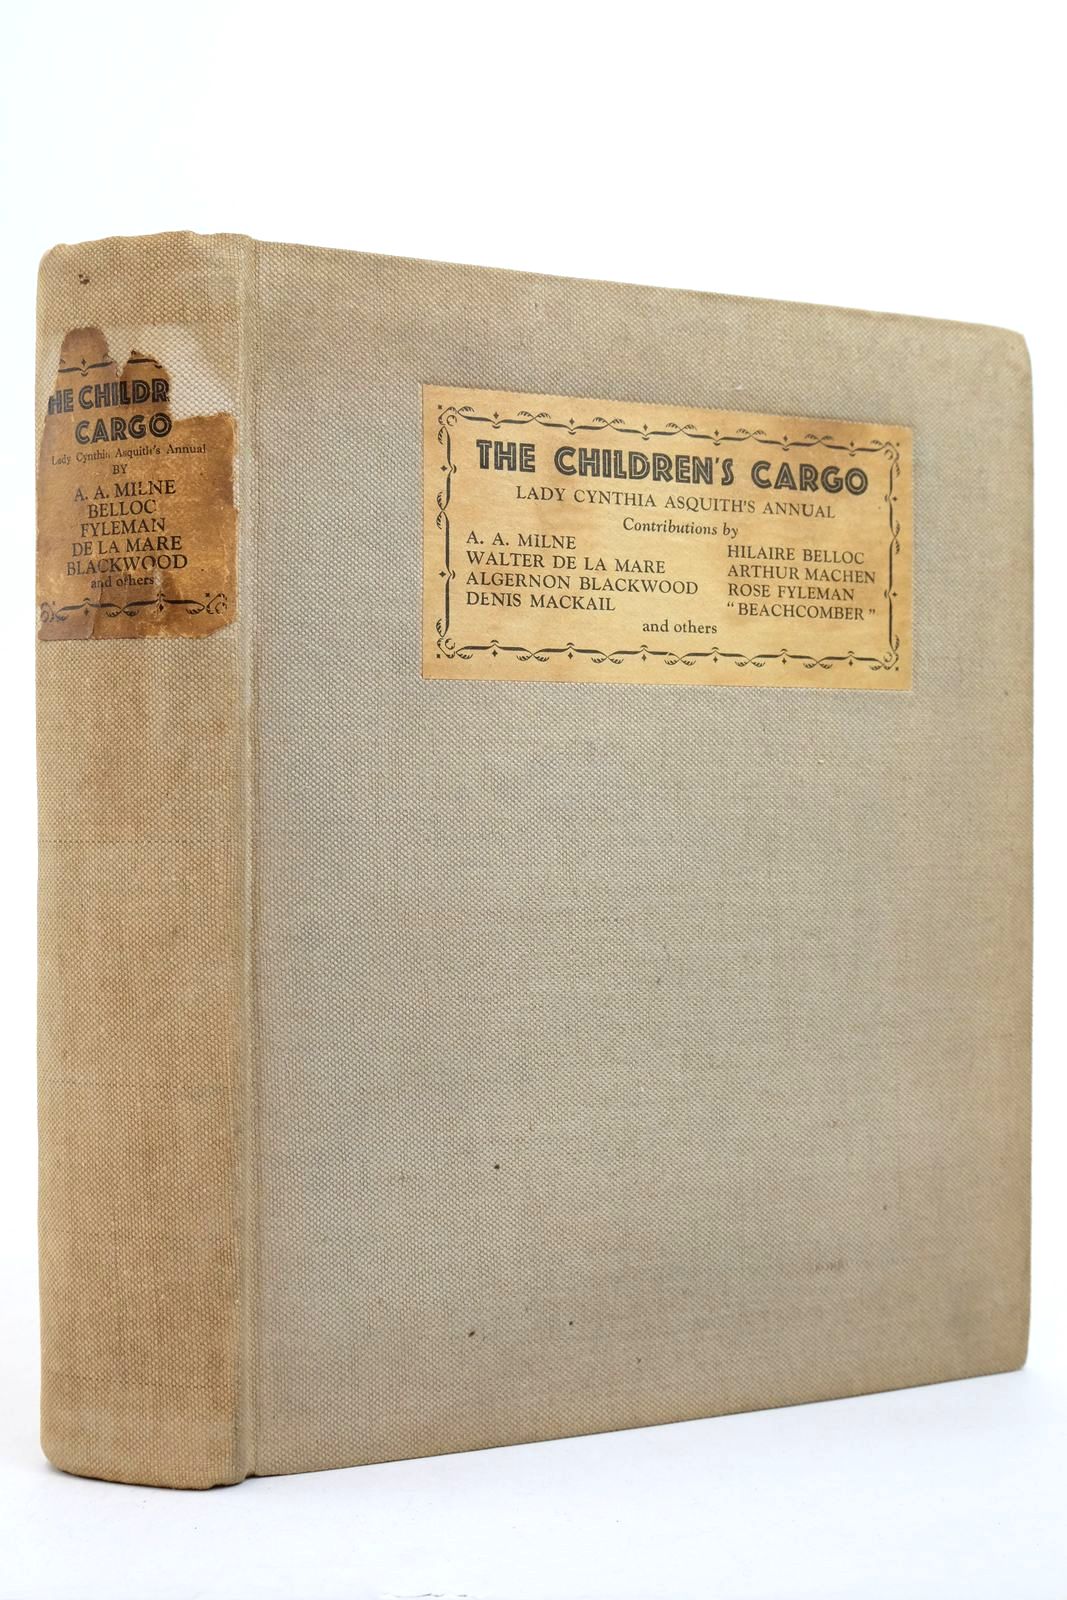 Photo of THE CHILDREN'S CARGO written by Asquith, Cynthia Milne, A.A. De La Mare, Walter Fyleman, Rose illustrated by Watson, A.H. Tempest, Margaret Jerrold, Daphne published by Eyre &amp; Spottiswoode (STOCK CODE: 2140258)  for sale by Stella & Rose's Books